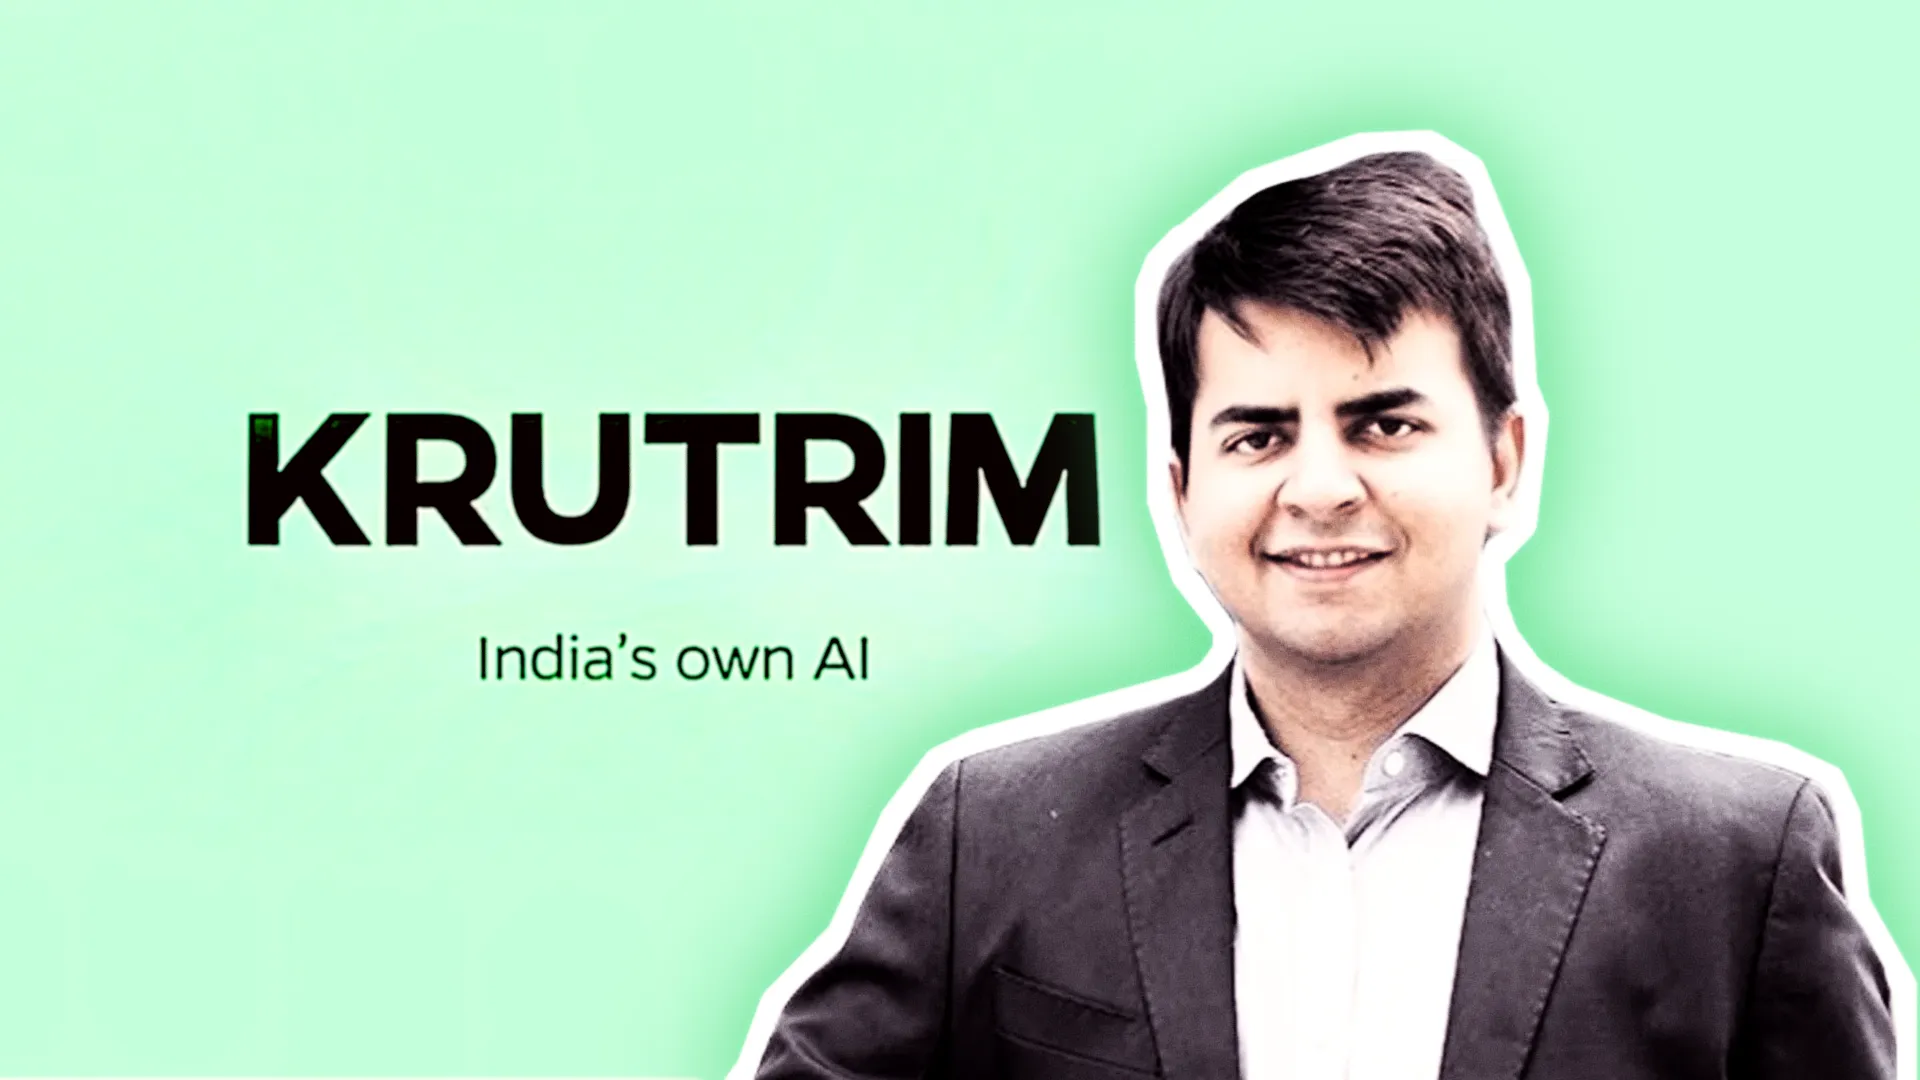 Pioneering India's Digital Future with Bhavish Aggarwal's Latest Android App and D